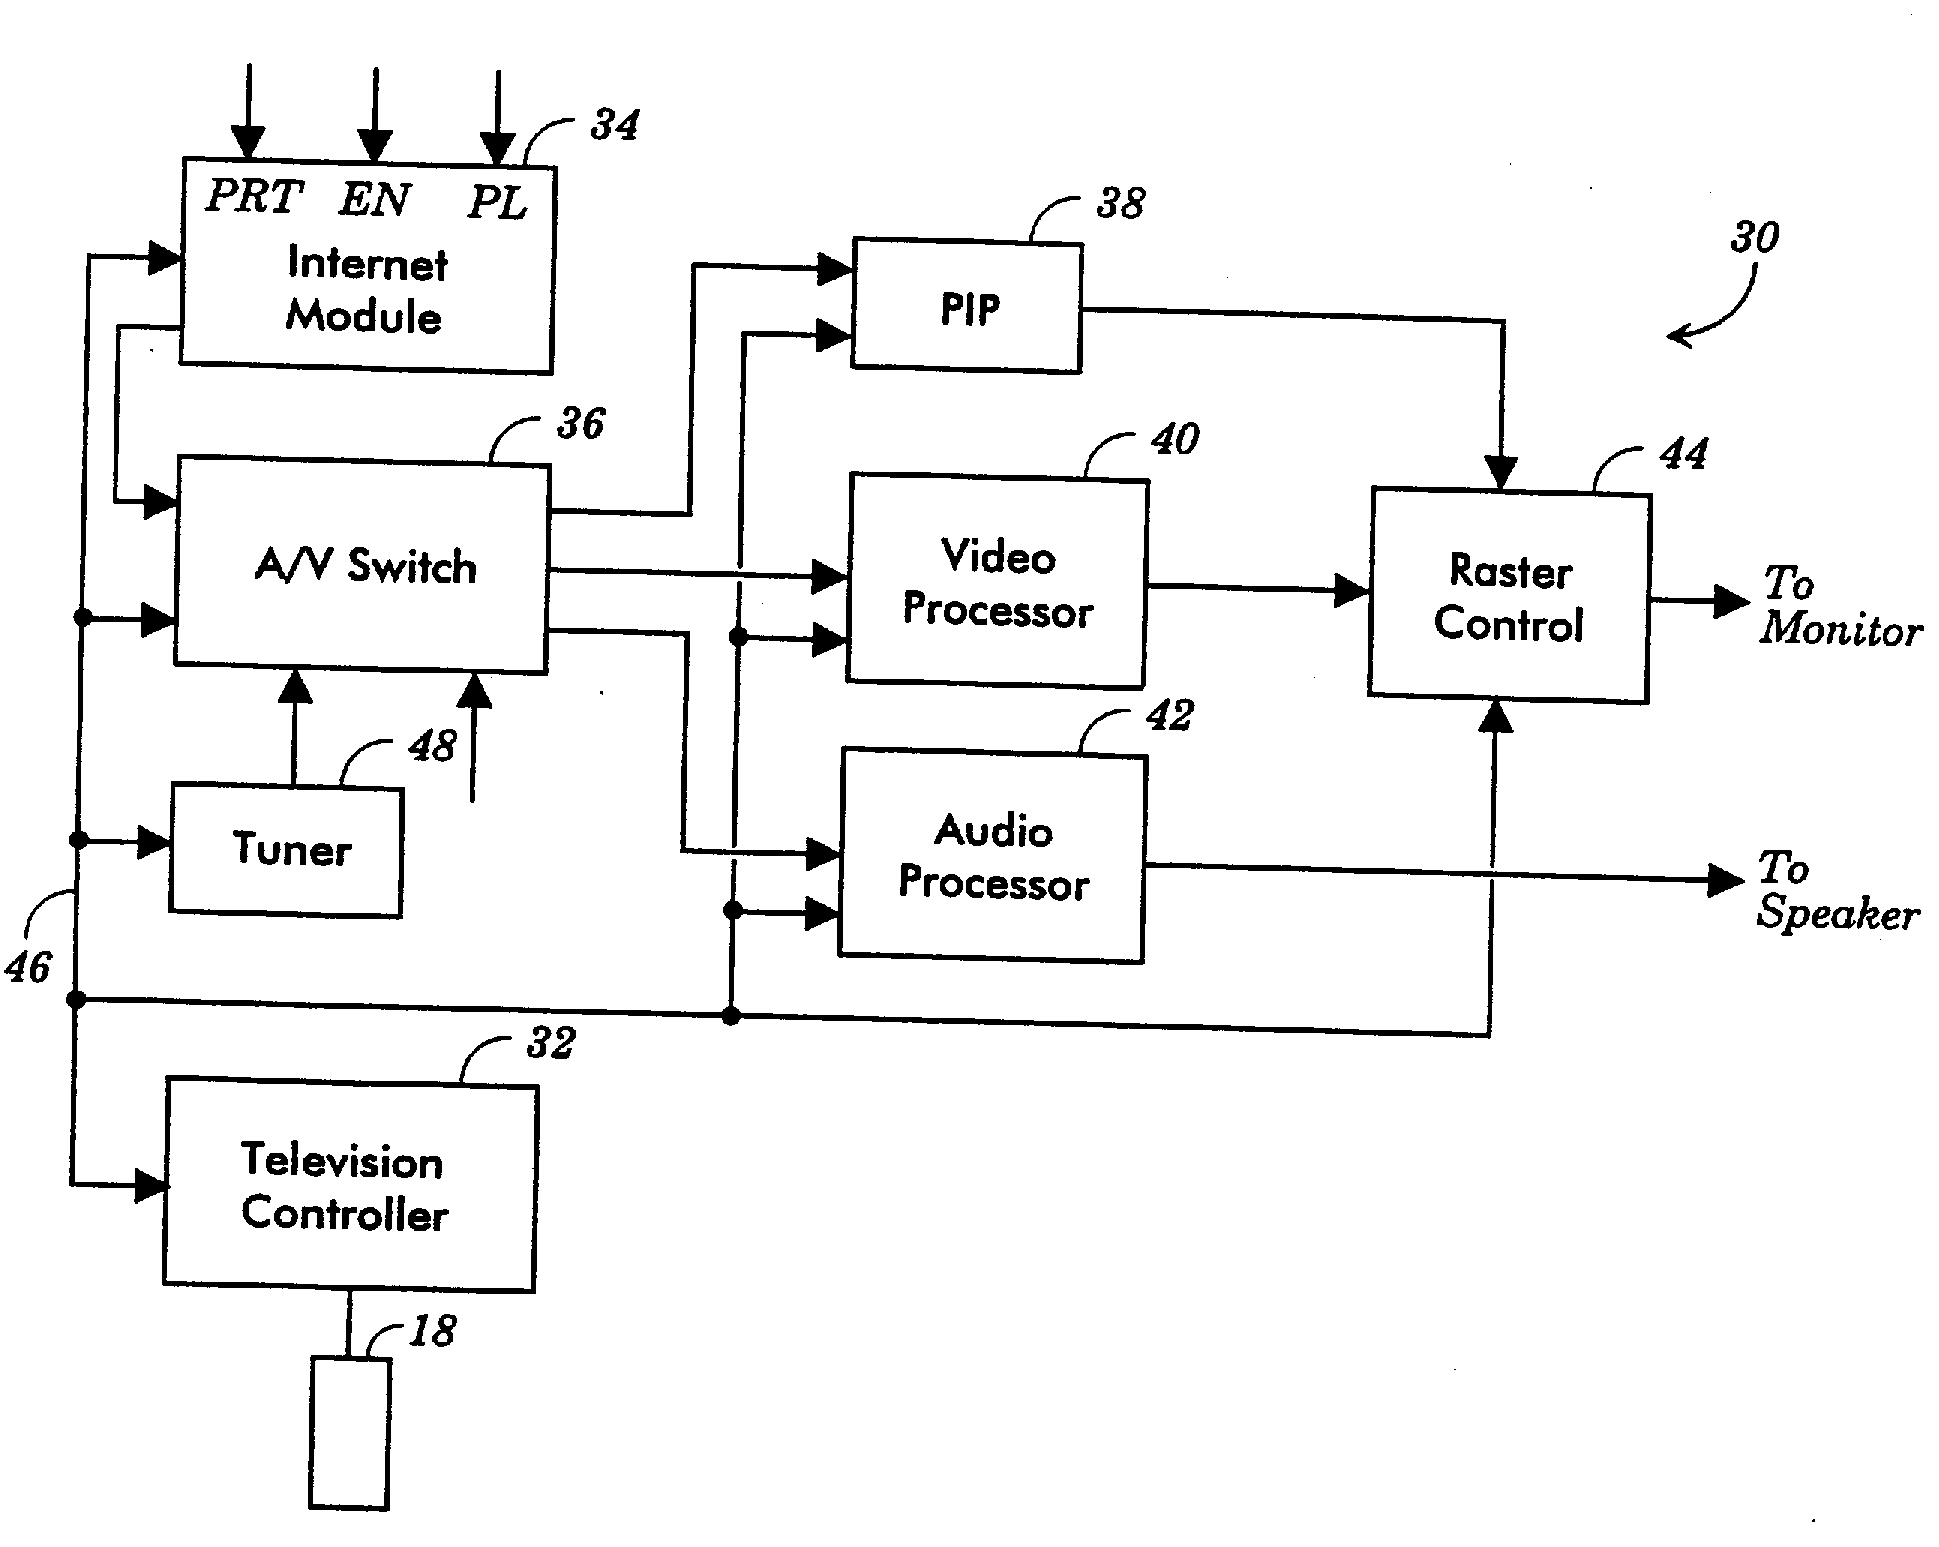 Web television that performs a pip control function